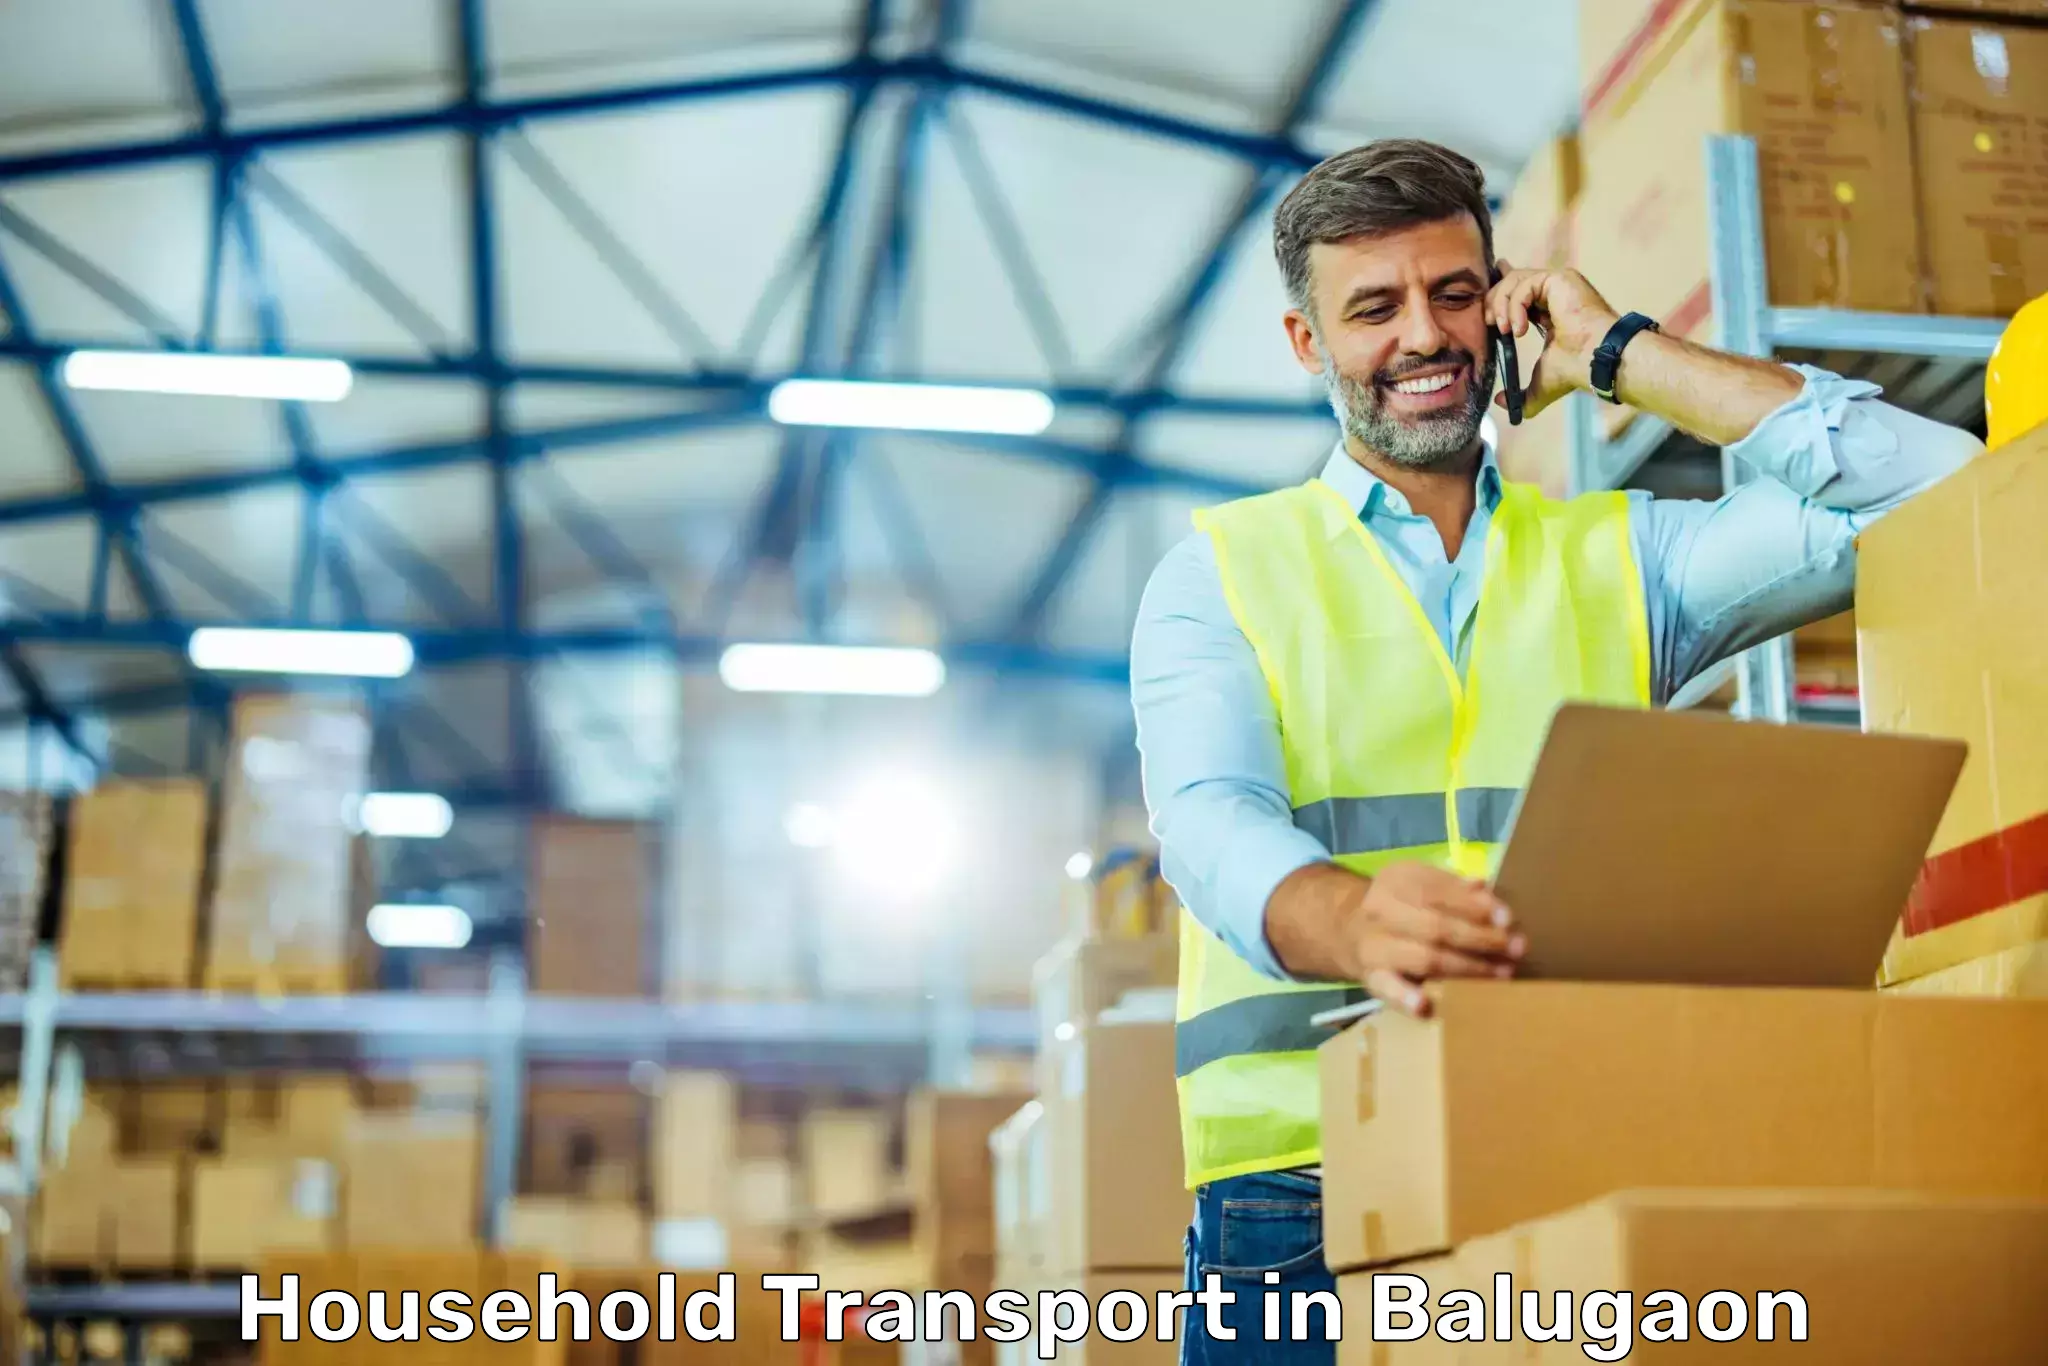 Household transport experts in Balugaon